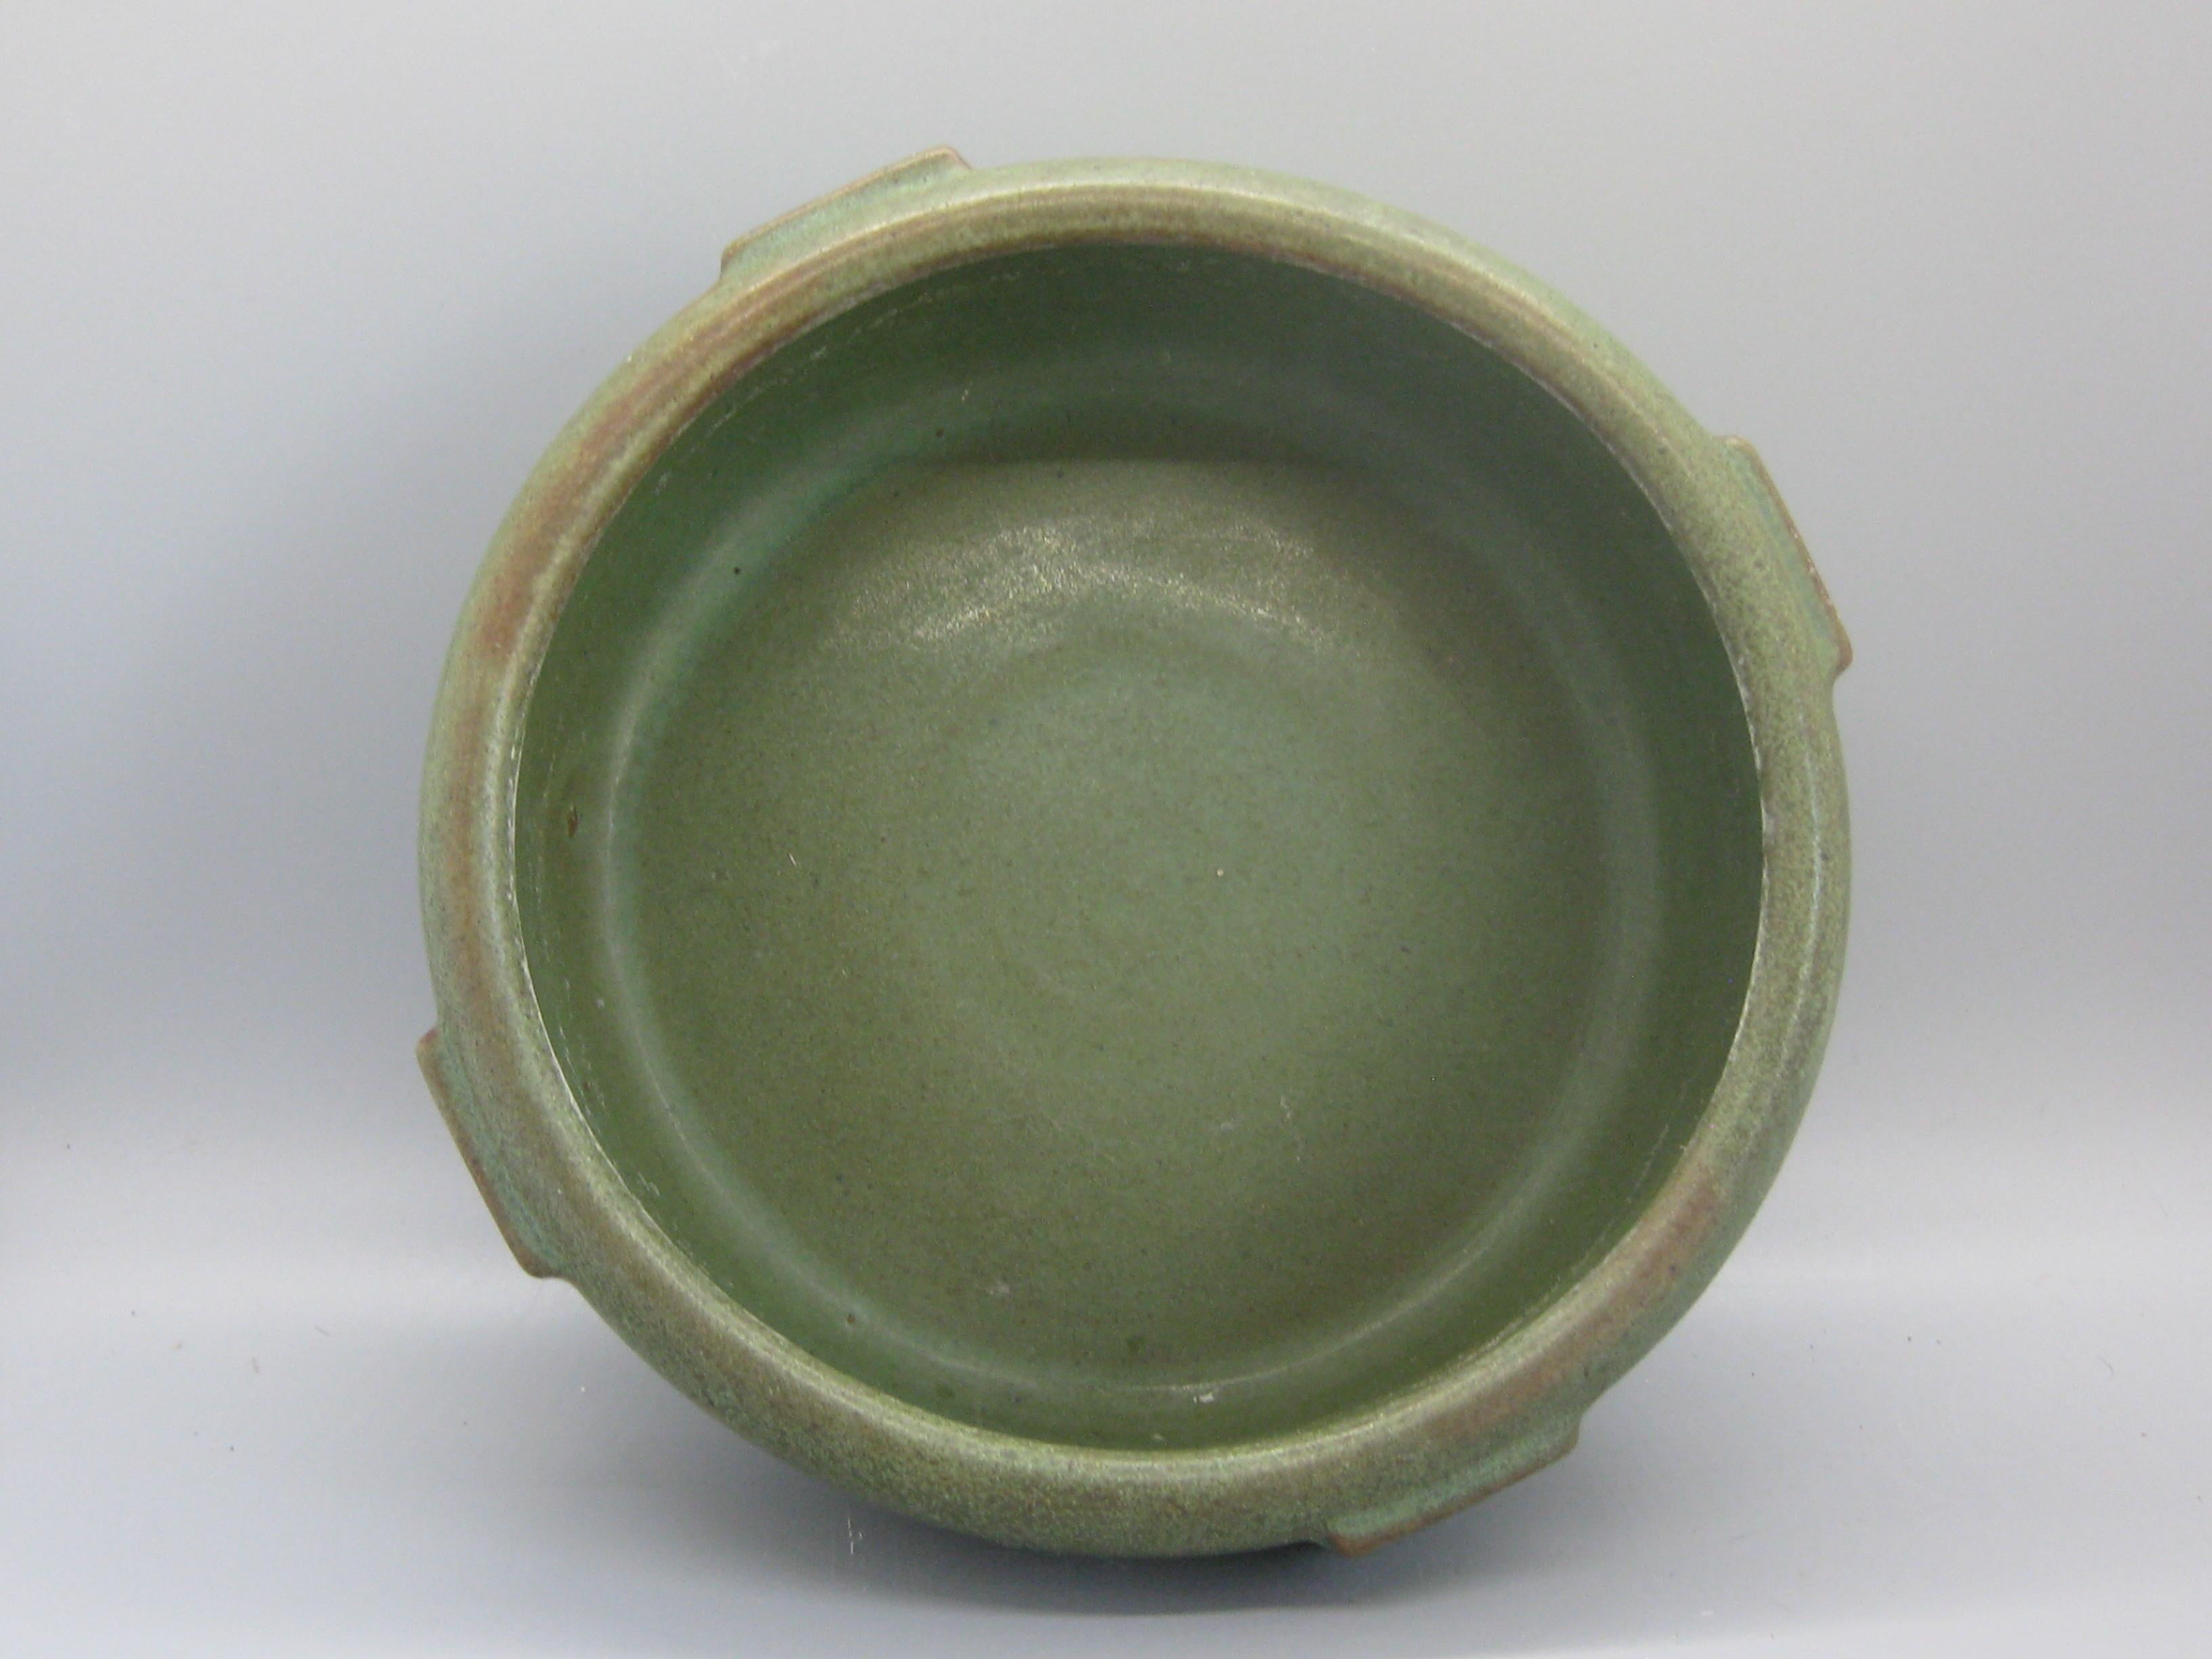 Antique Peters & Reed Zanesville Arts & Crafts Matte Green Art Pottery Bowl Vase For Sale 3